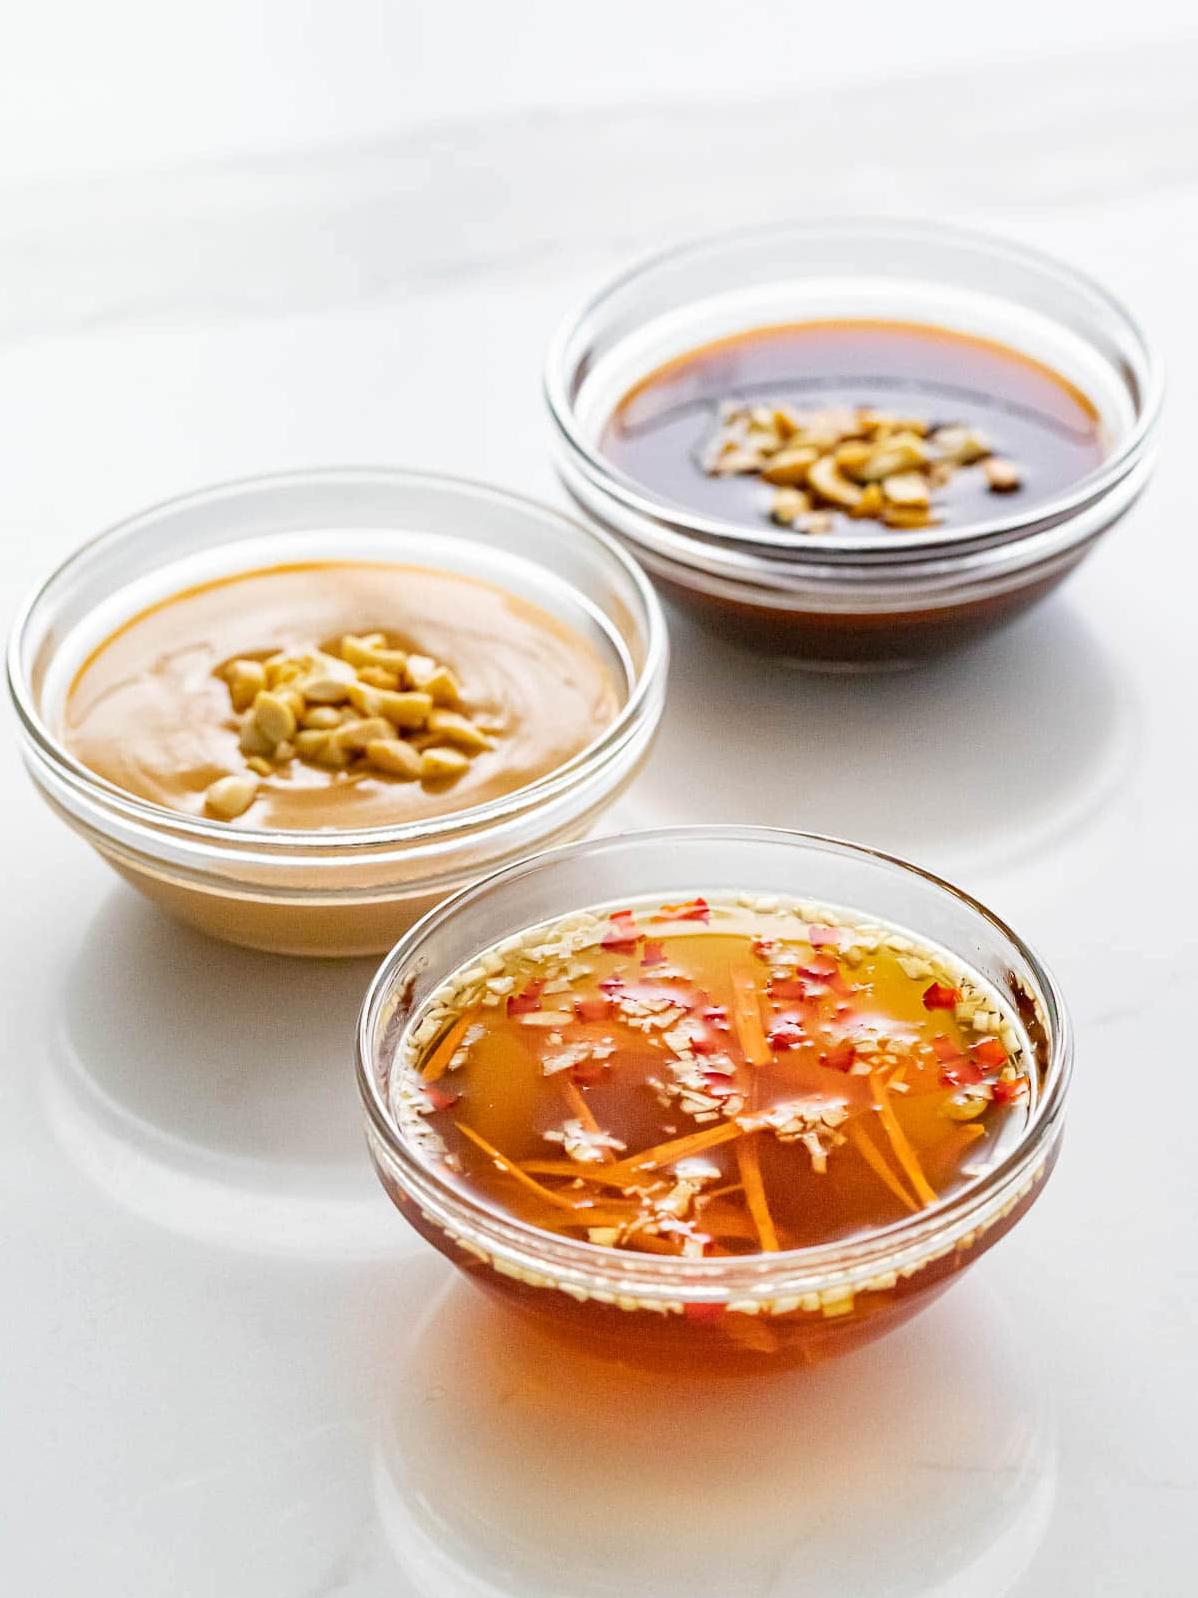  Meet your new favorite dipping sauce for all your Asian dishes